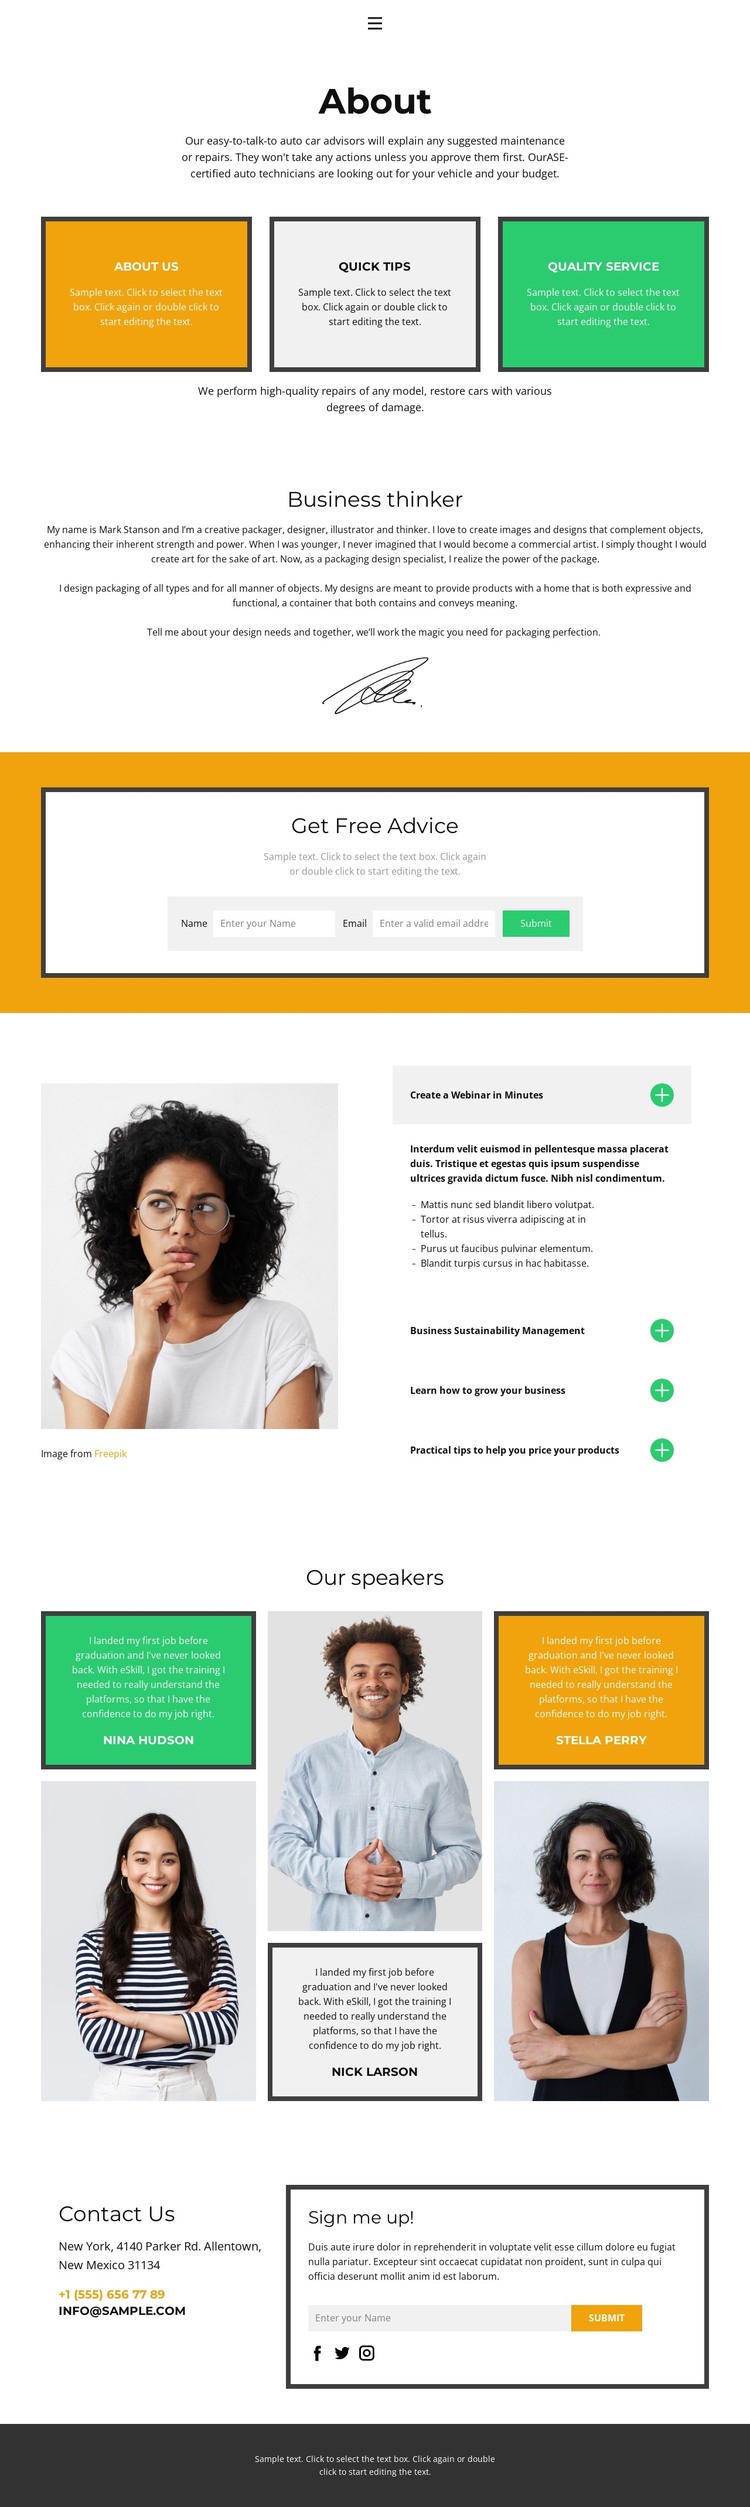 Read and find answers HTML Template